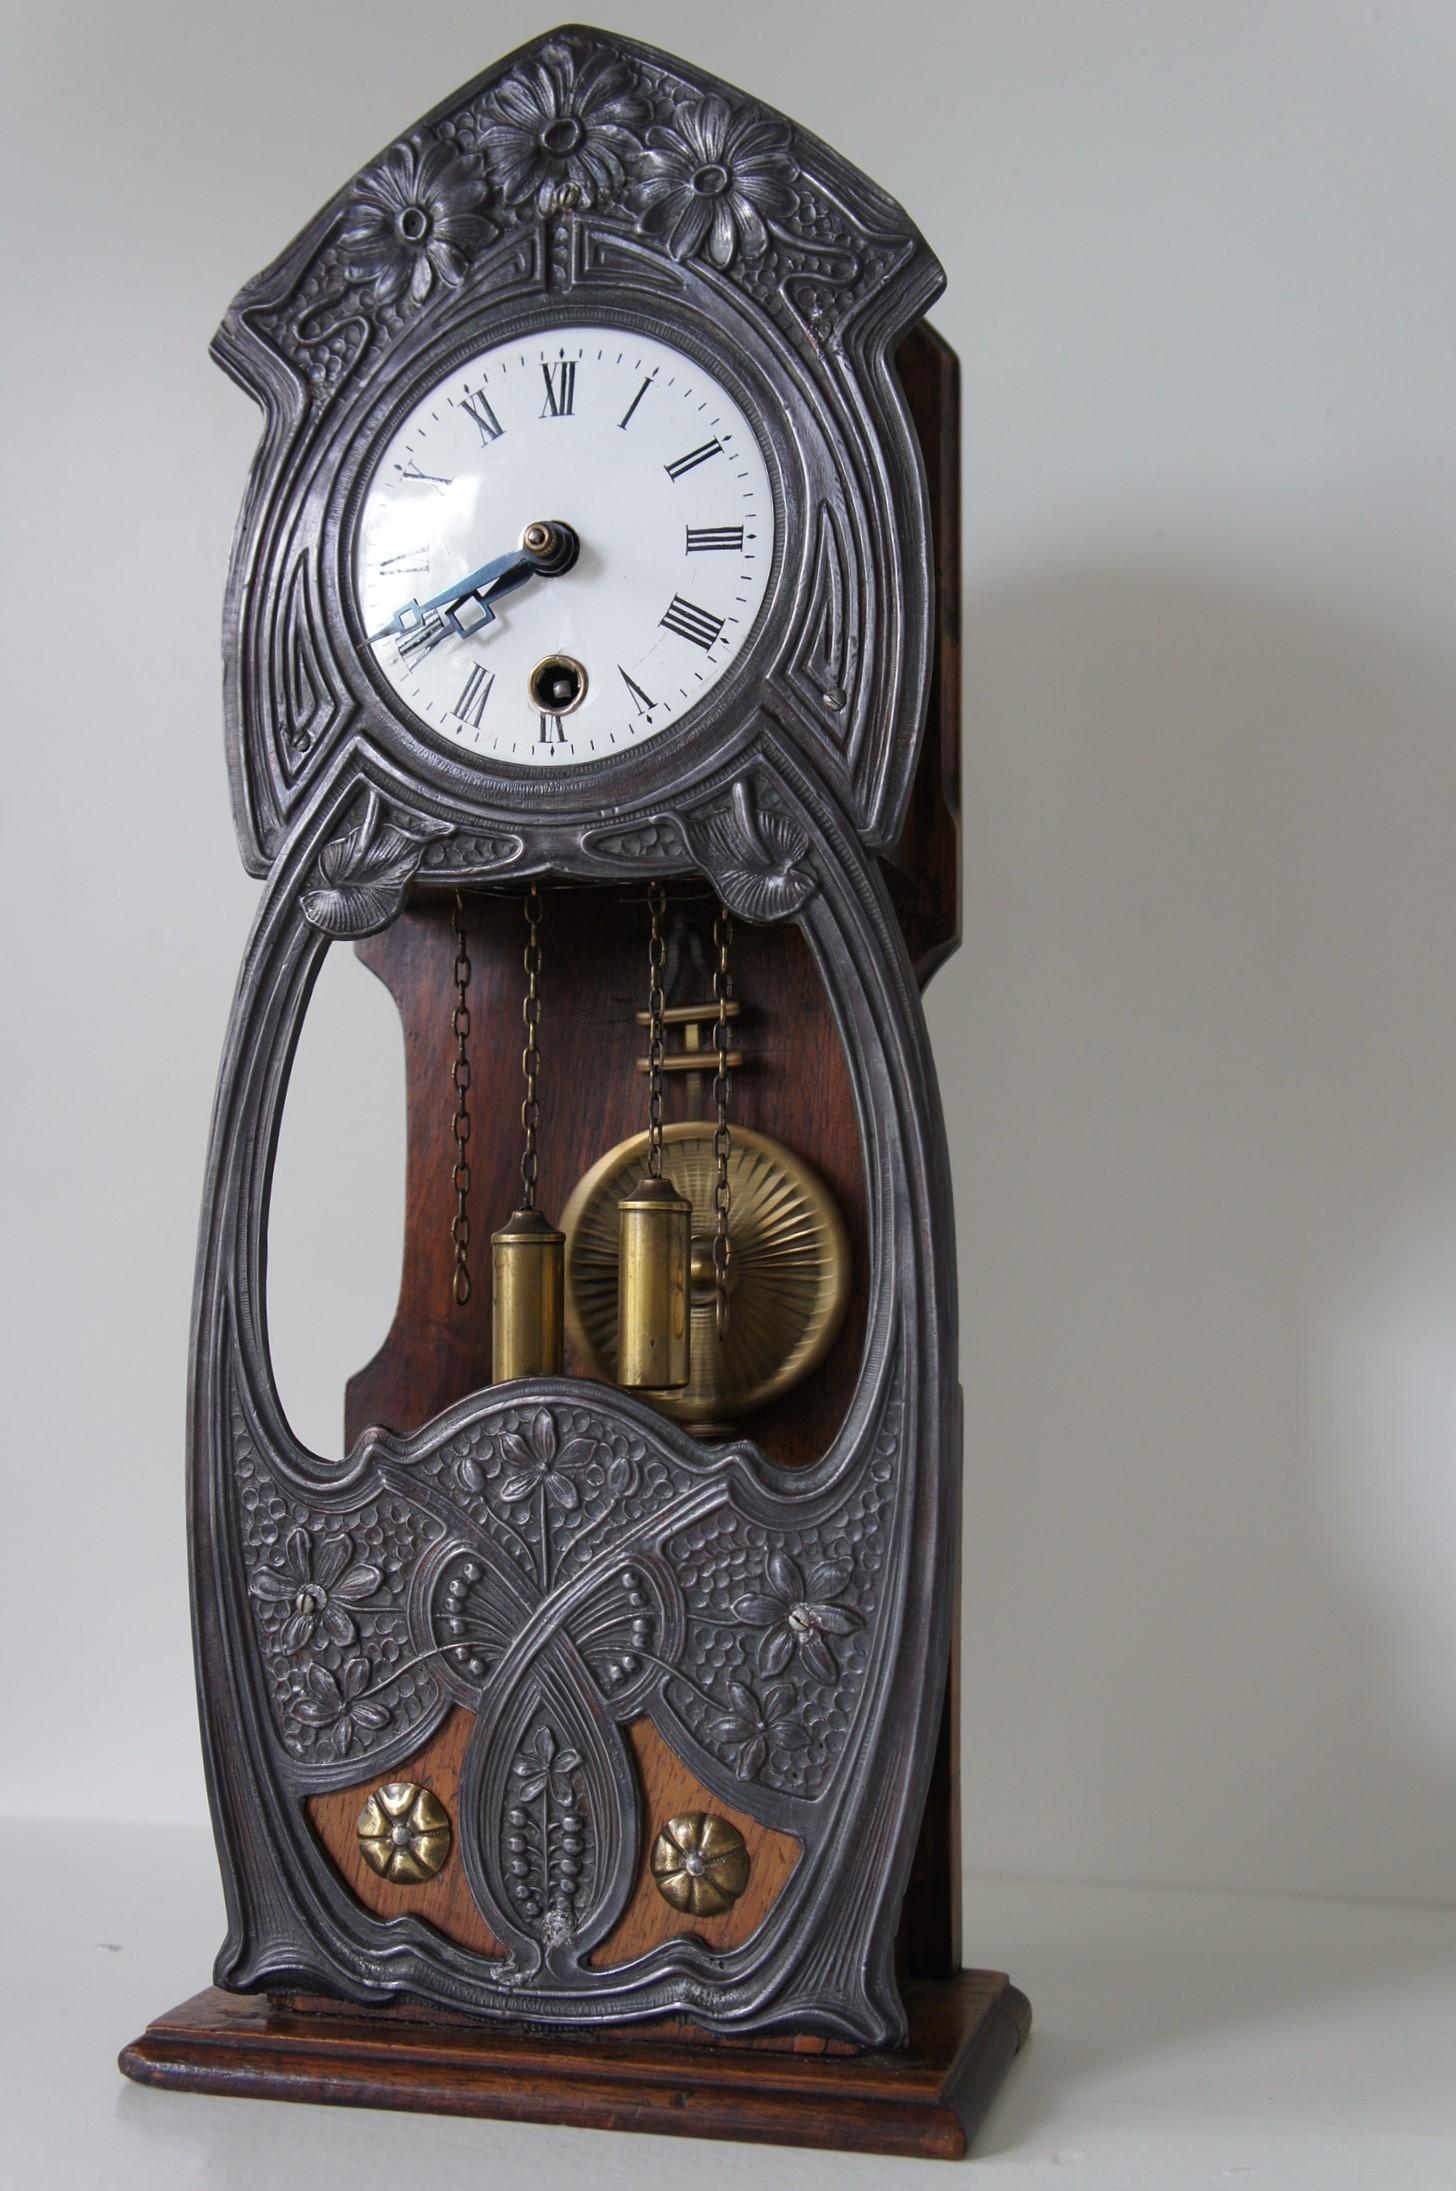 Rare and handcrafted miniature grandfather clock.

For the collectors of wonderful Arts & Crafts antiques, we also have this one of a kind, miniature grandfather clock. All handcrafted out of a combination of rich materials (both in design and